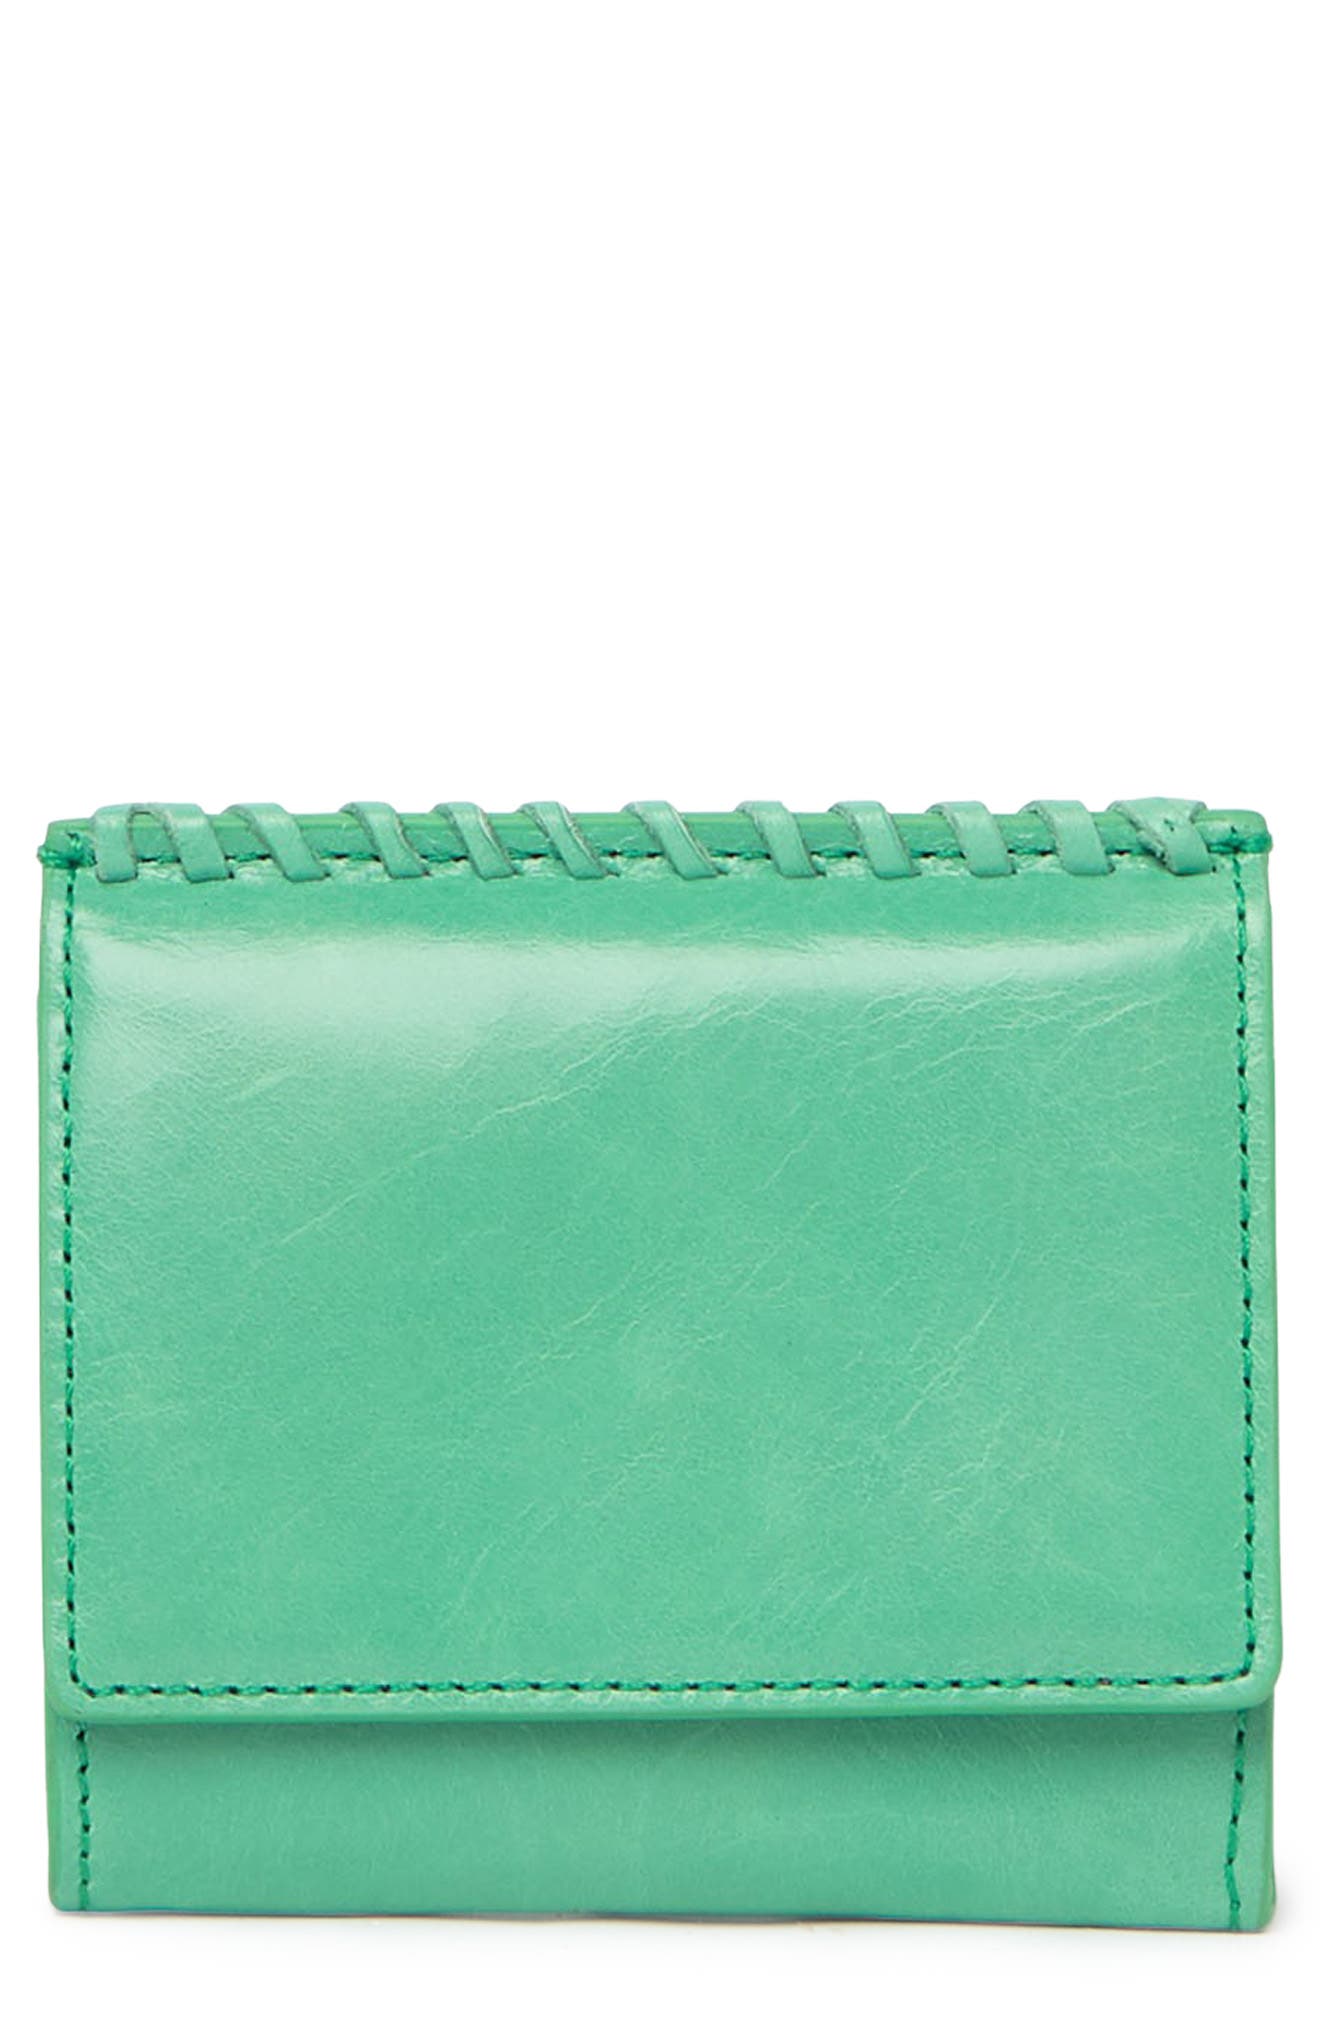 Hobo Stitch Woven Leather Bifold Wallet In Mint